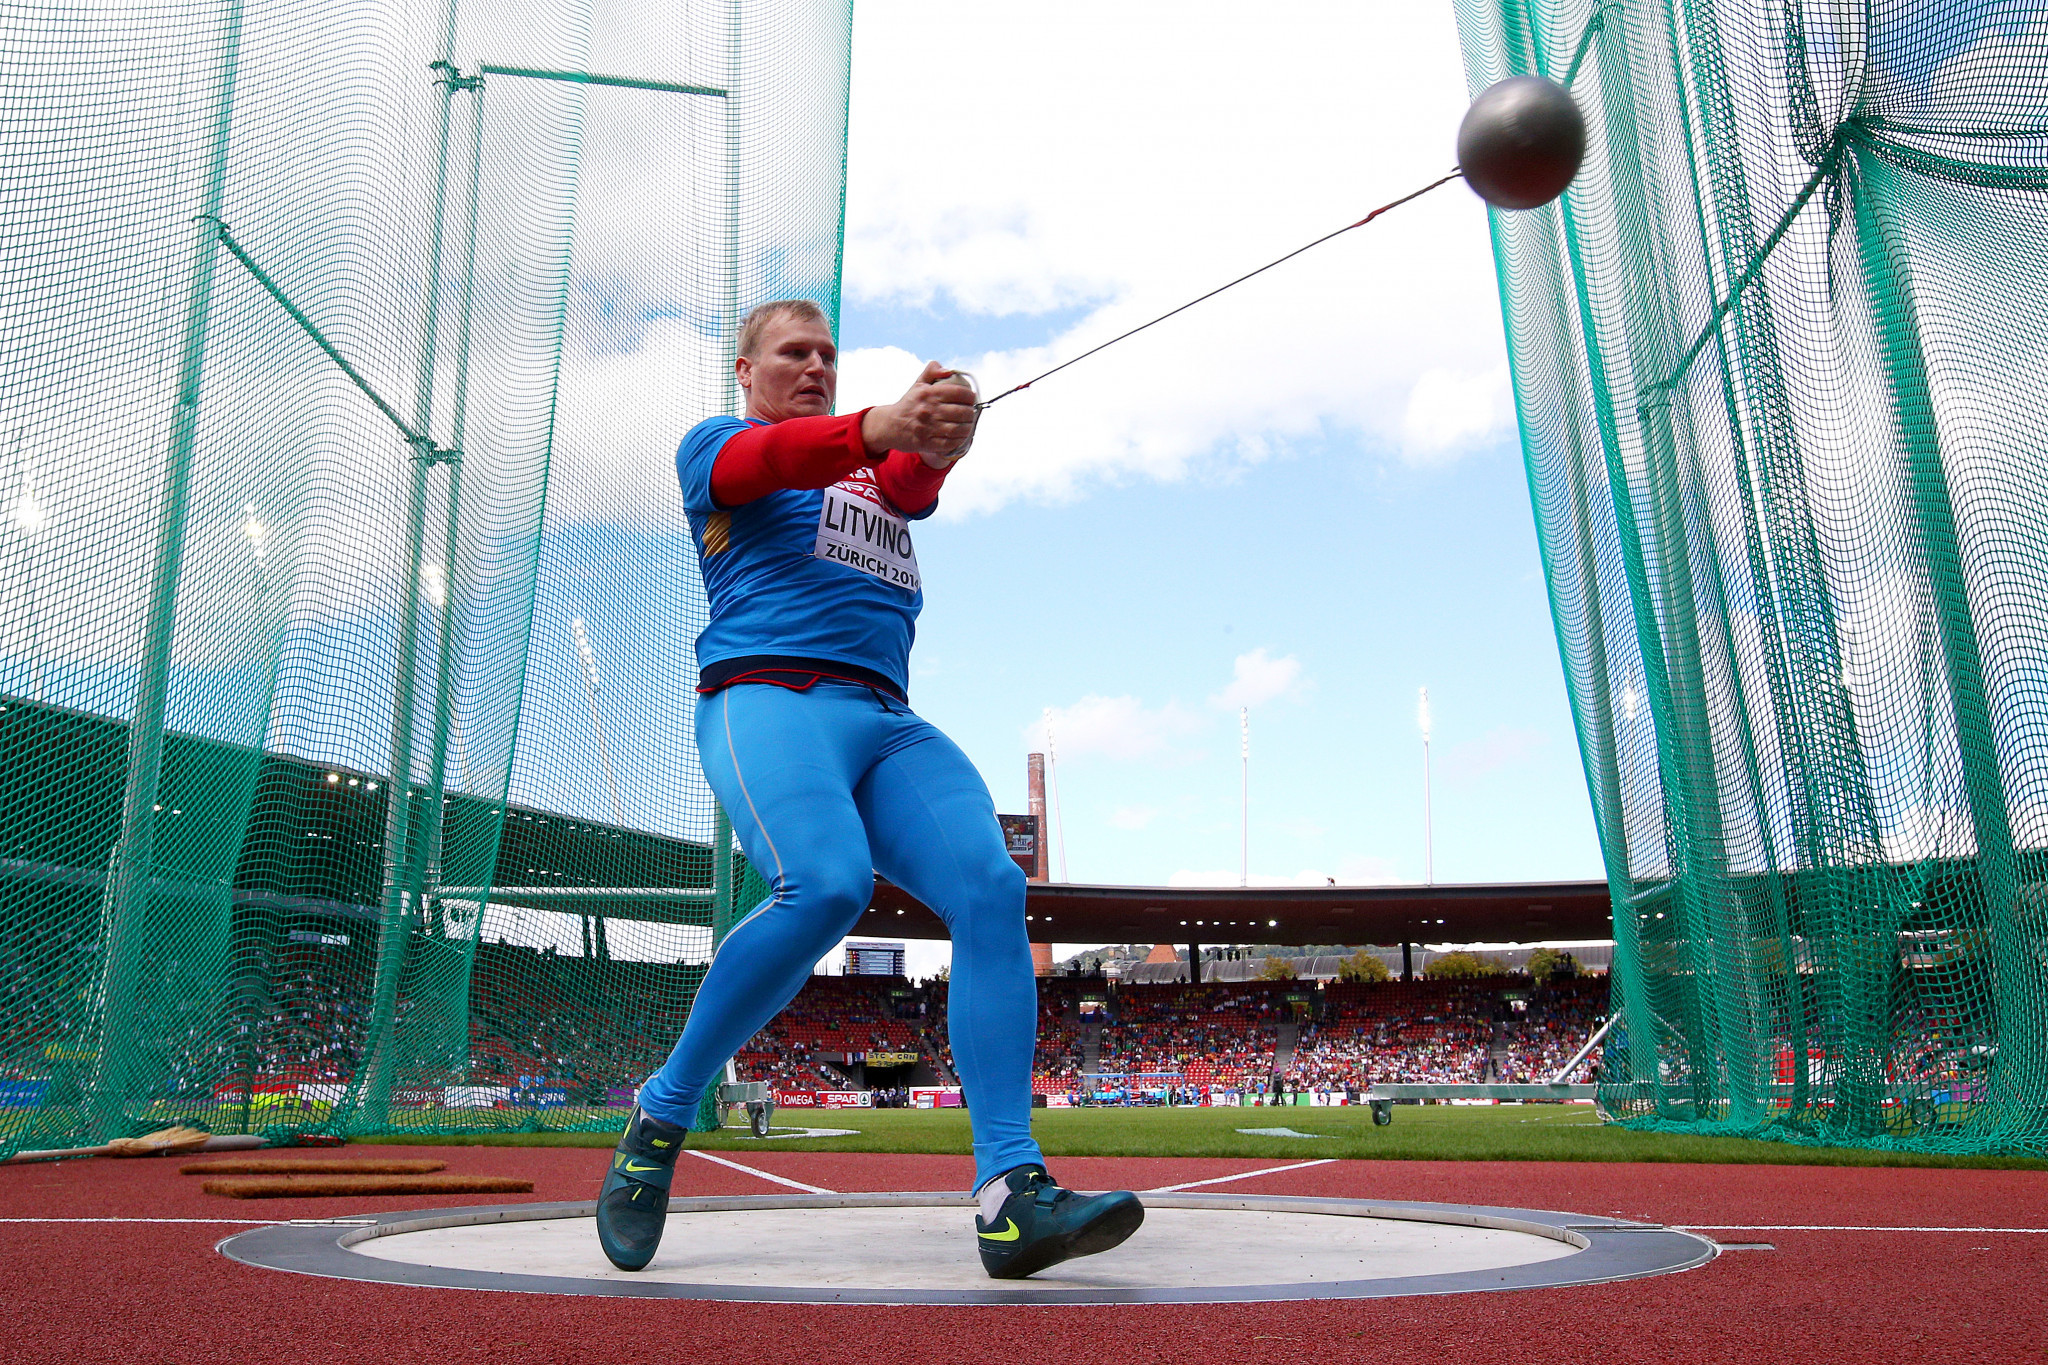 Sergey Litvinov has admitted on his Facebook page that he took banned anabolic steroids more than a decade ago, but blamed the Russian Athletics Federation for pressurising him to do it ©Getty Images